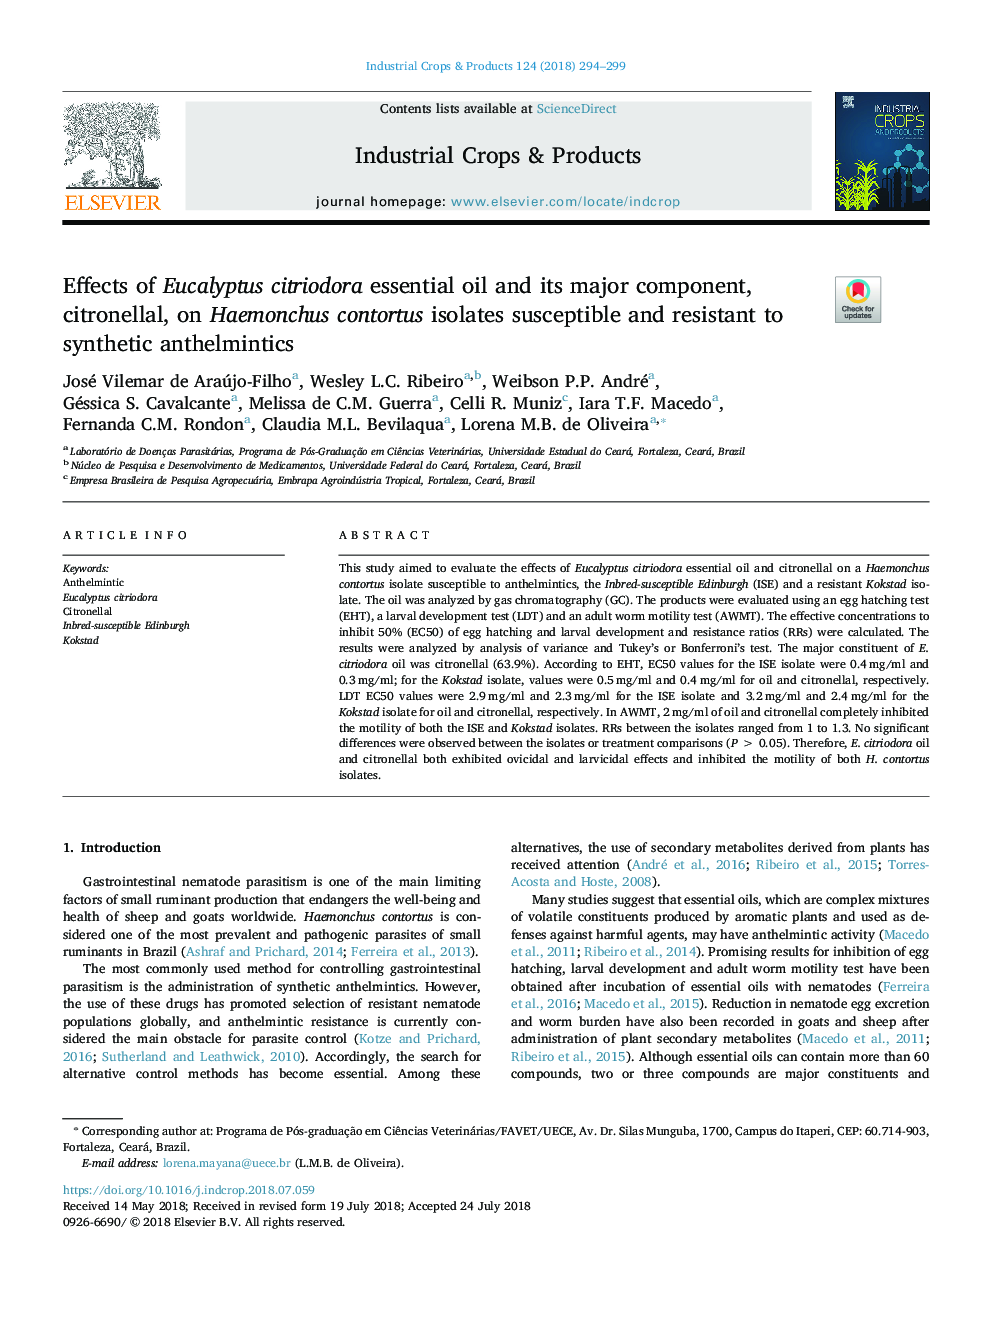 Effects of Eucalyptus citriodora essential oil and its major component, citronellal, on Haemonchus contortus isolates susceptible and resistant to synthetic anthelmintics